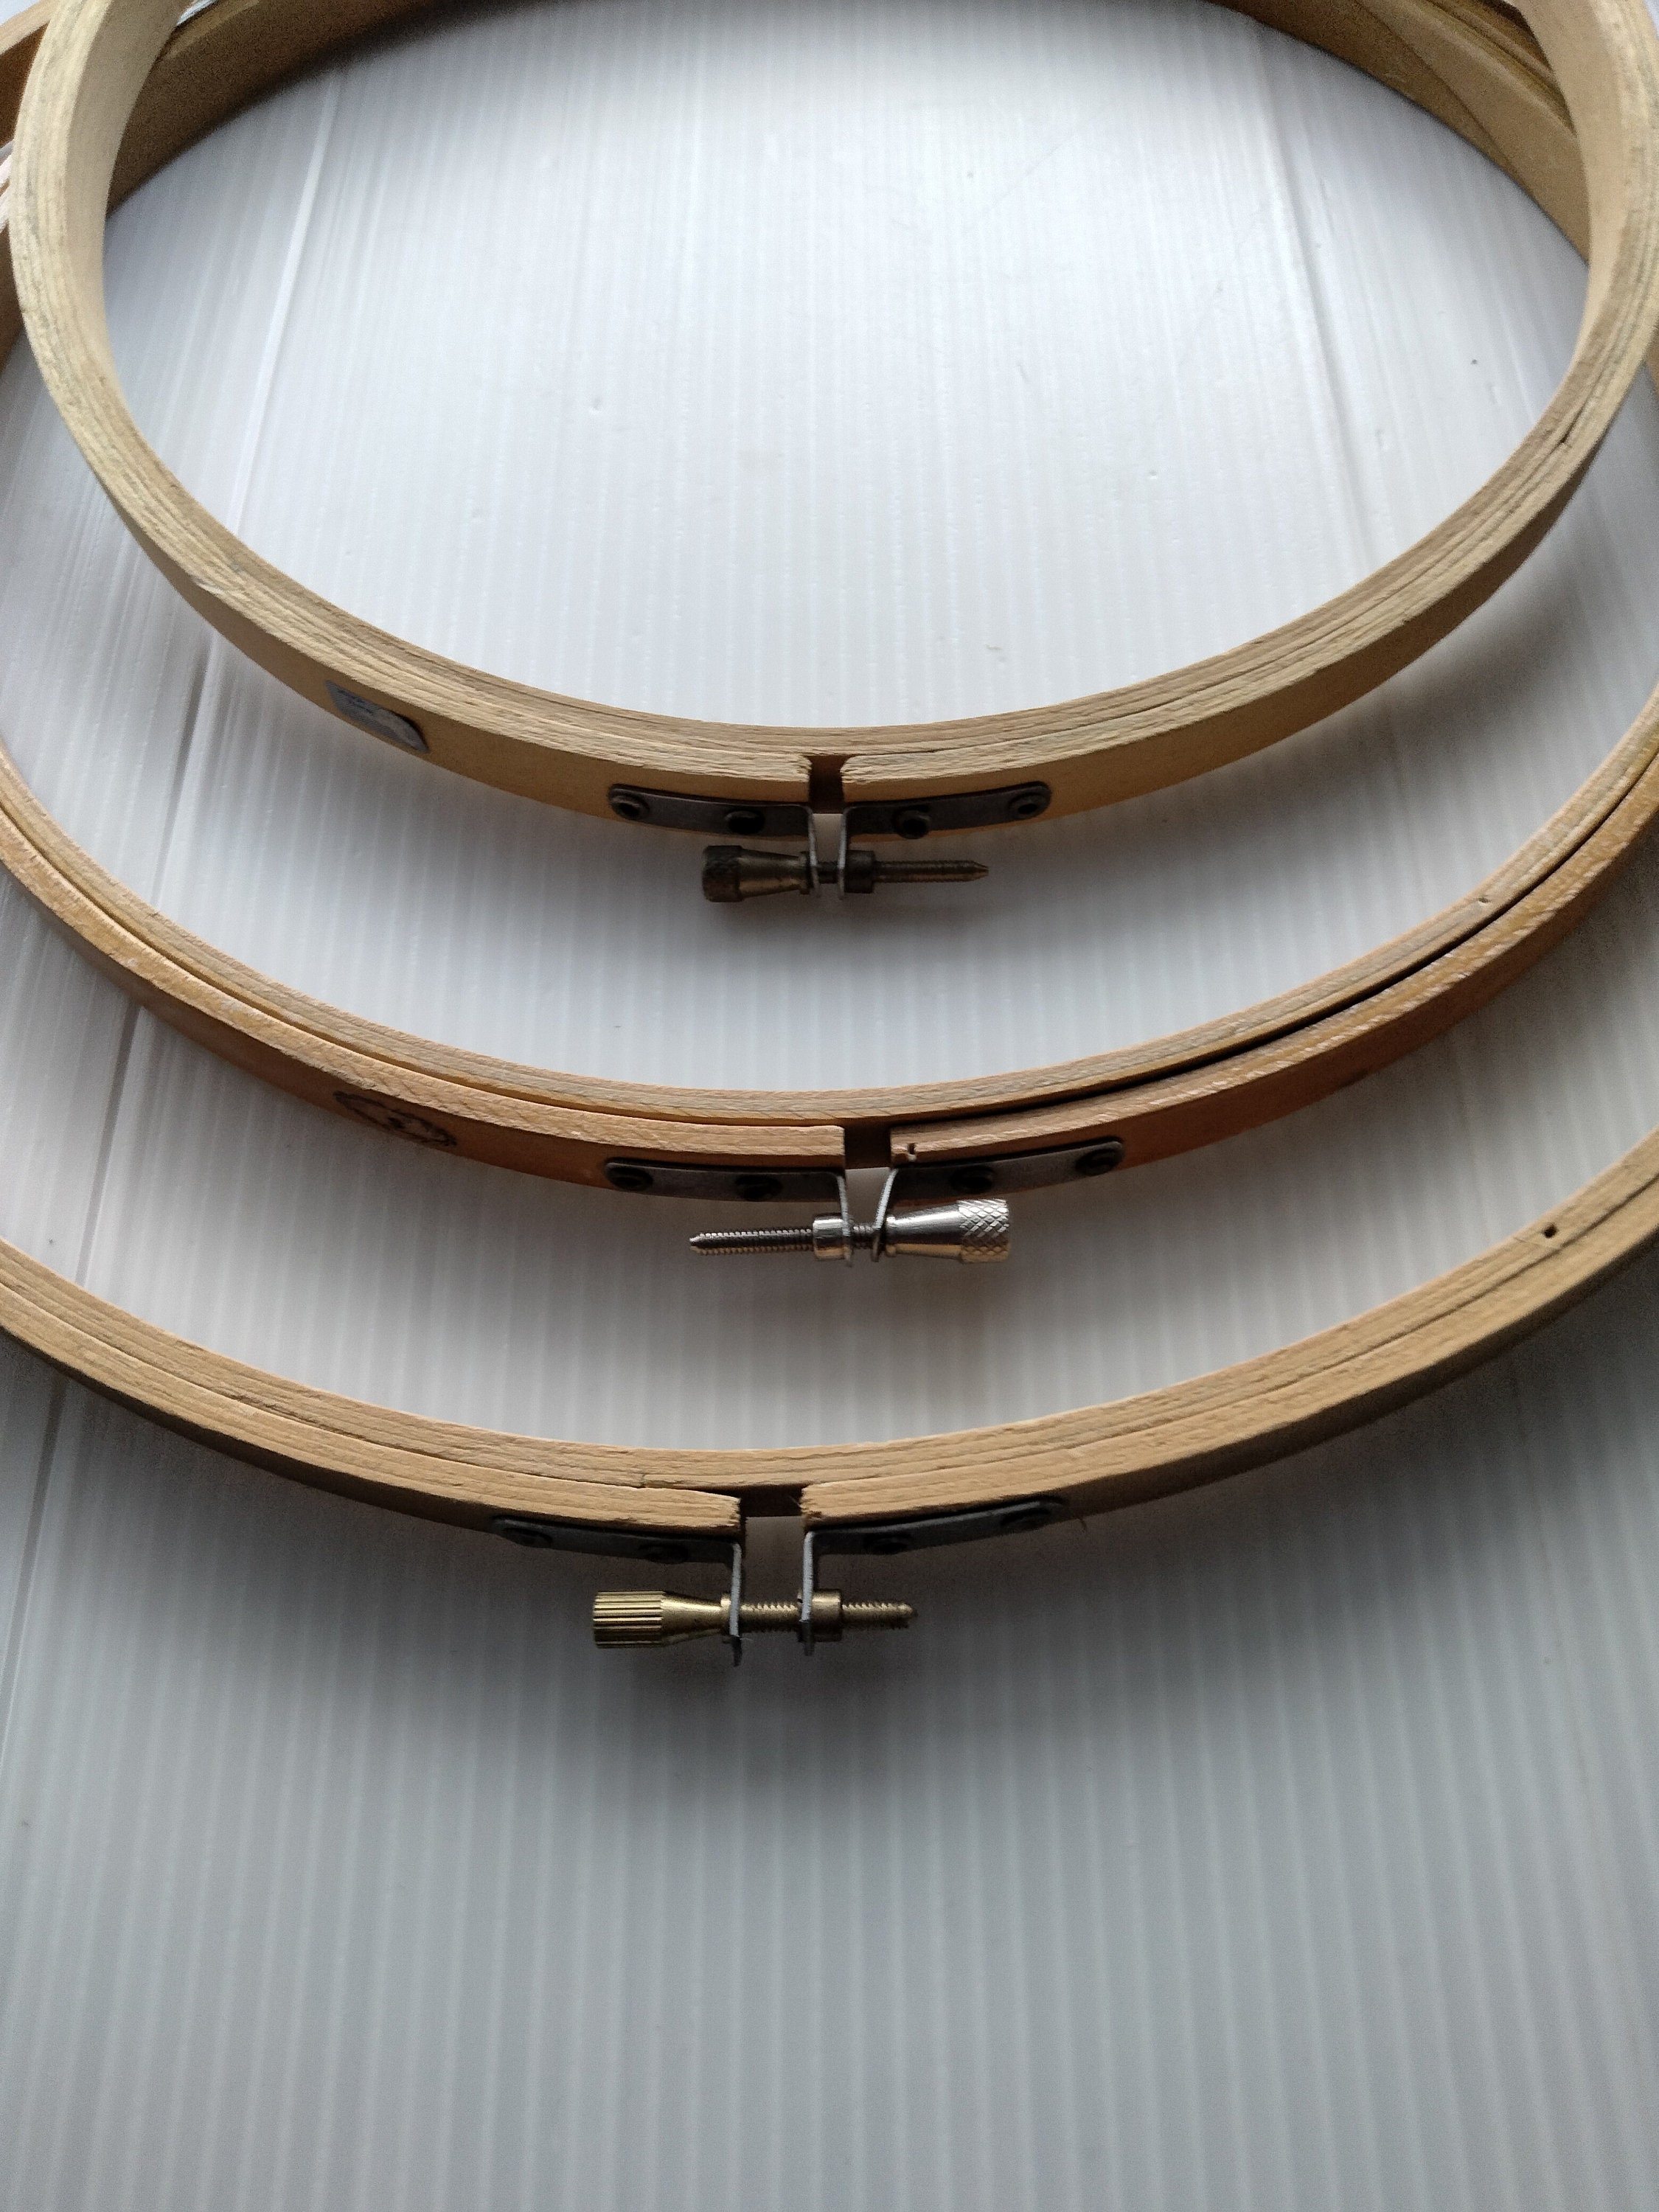 6 inch Round Wooden Embroidery Hoops Bulk Wholesale 12 Pieces